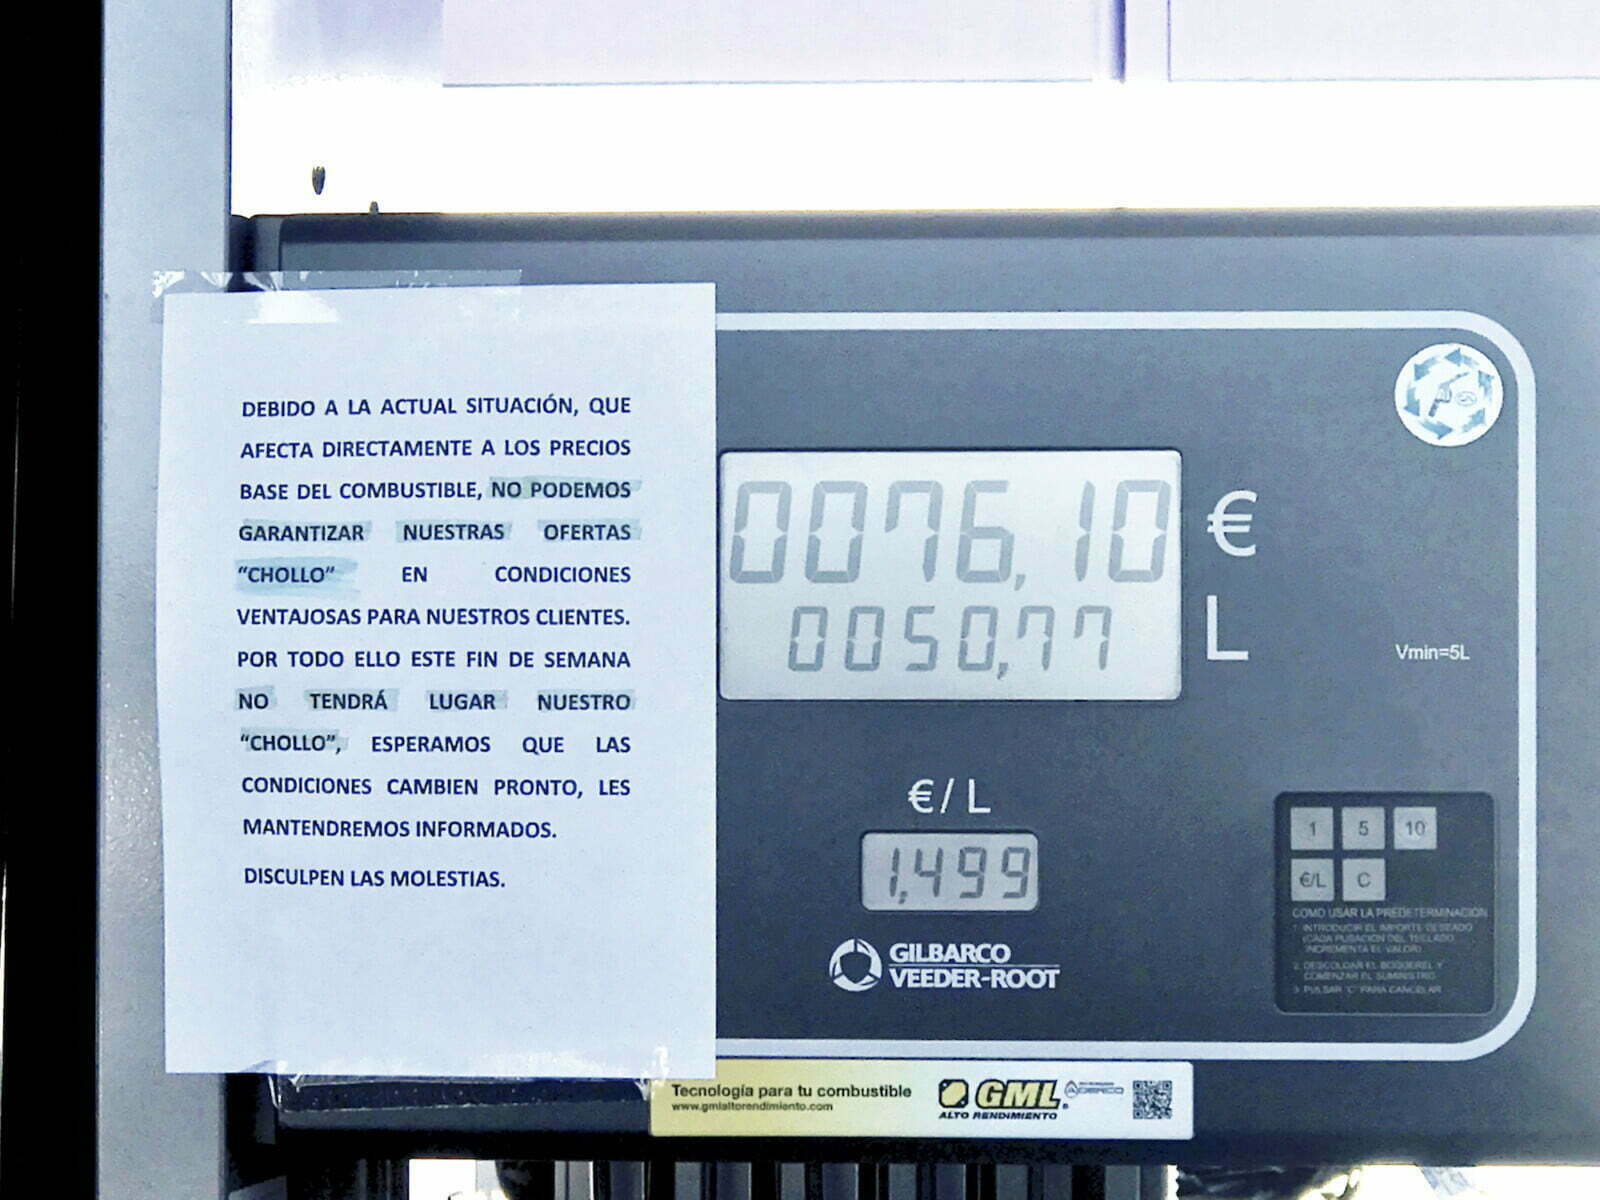 Huge rise in petrol prices across the Canary Islands